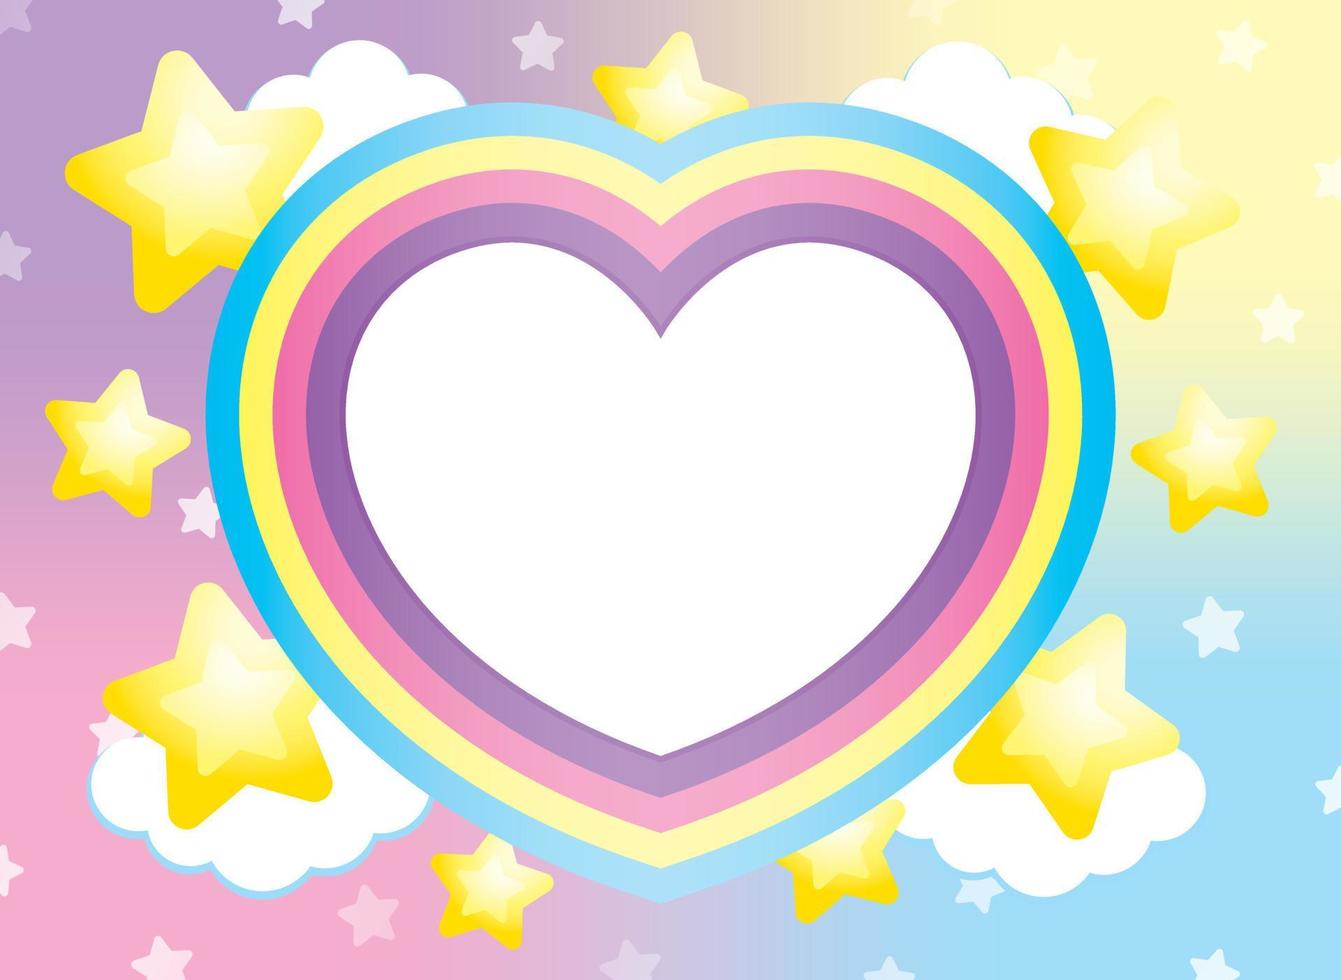 cute kawaii heart shape rainbow frame with cloud and stars element on sweet pastel gradient background vector